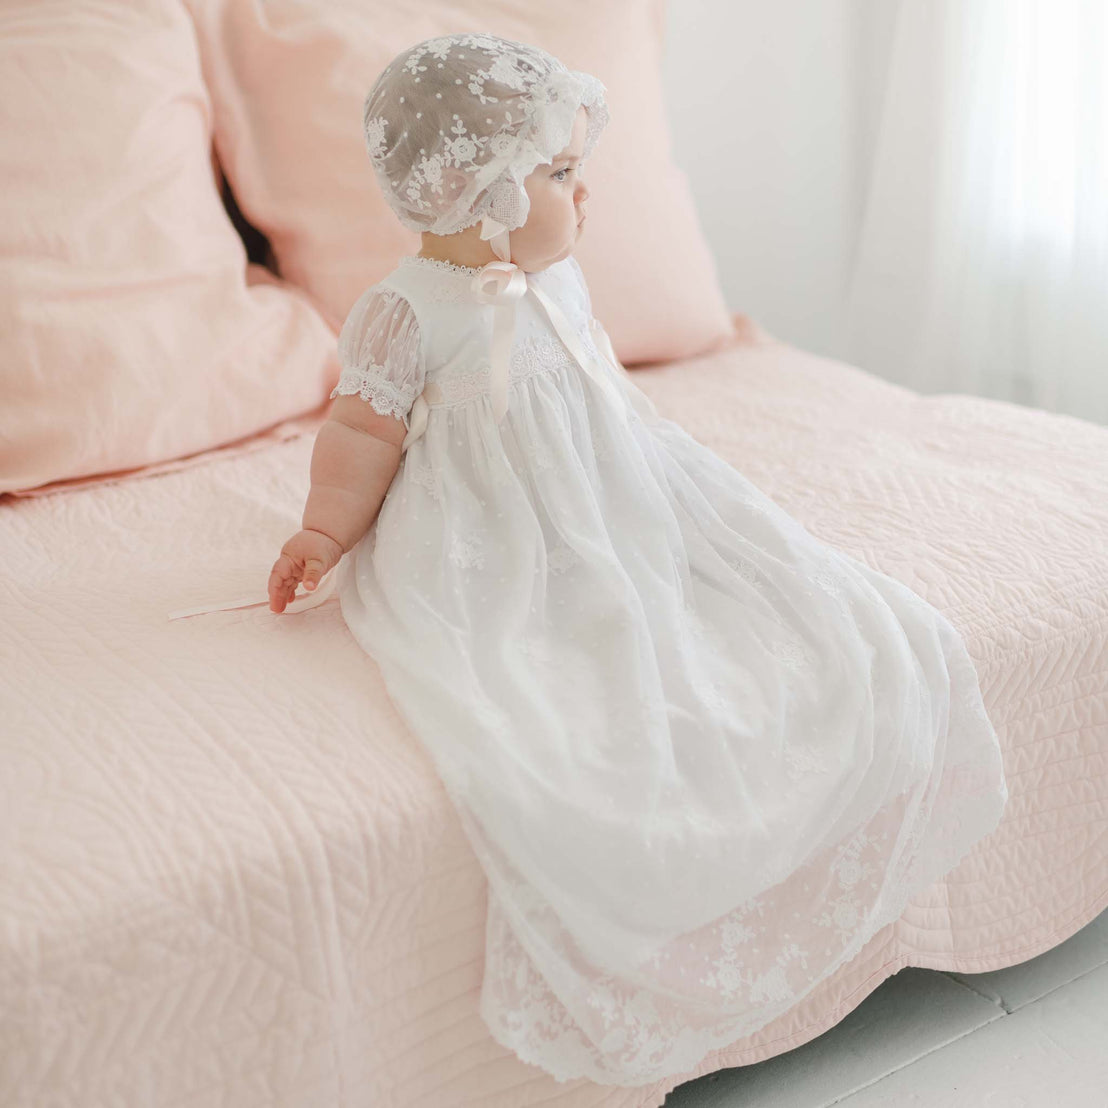 A baby wearing a long, white Melissa Christening Gown & Bonnet sits on a blush pink bed. The baby is turned slightly to the side, looking away. The bed is made with a quilt of the same blush pink color, and the background is softly lit.